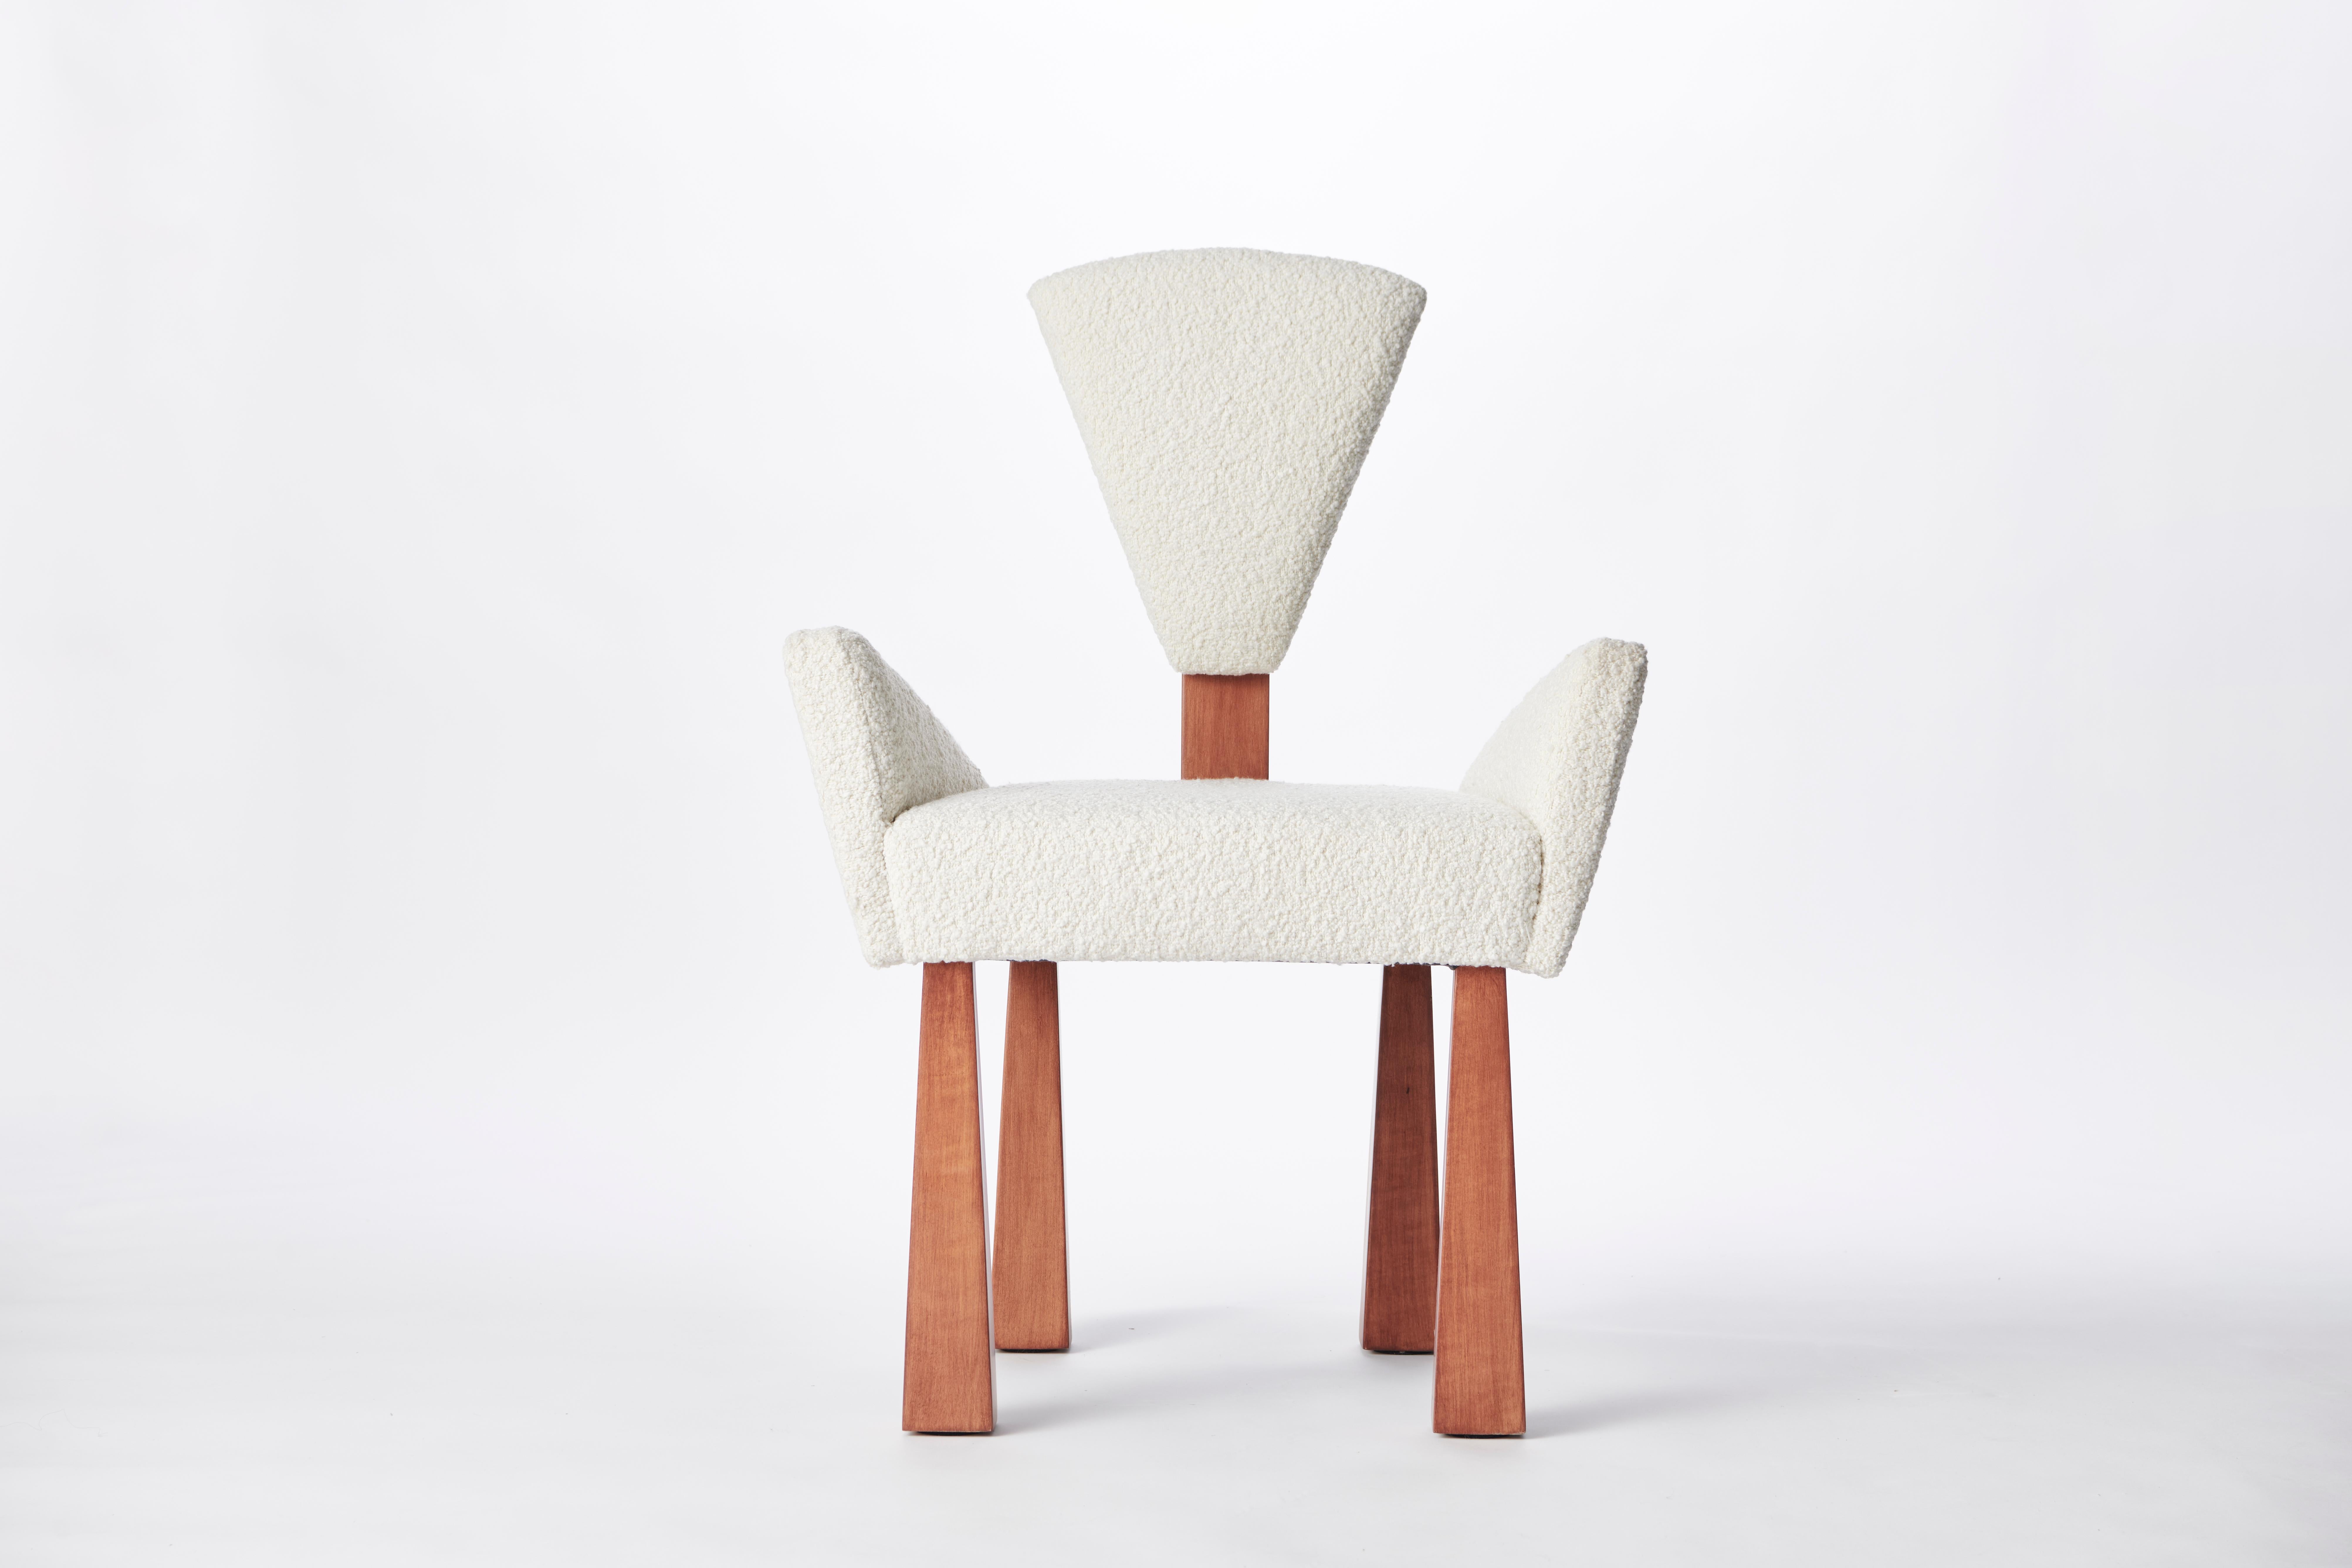 Made to order wood & bouclé dining chair designed by Christian Siriano.

Fabric: Ivory Bouclé (available in custom fabric)
Base: Red Oak Wood (available in custom finish)

Dimensions: 
Overall Depth: 21”
Overall Width: 25.5”
Overall Height: 37”
Back